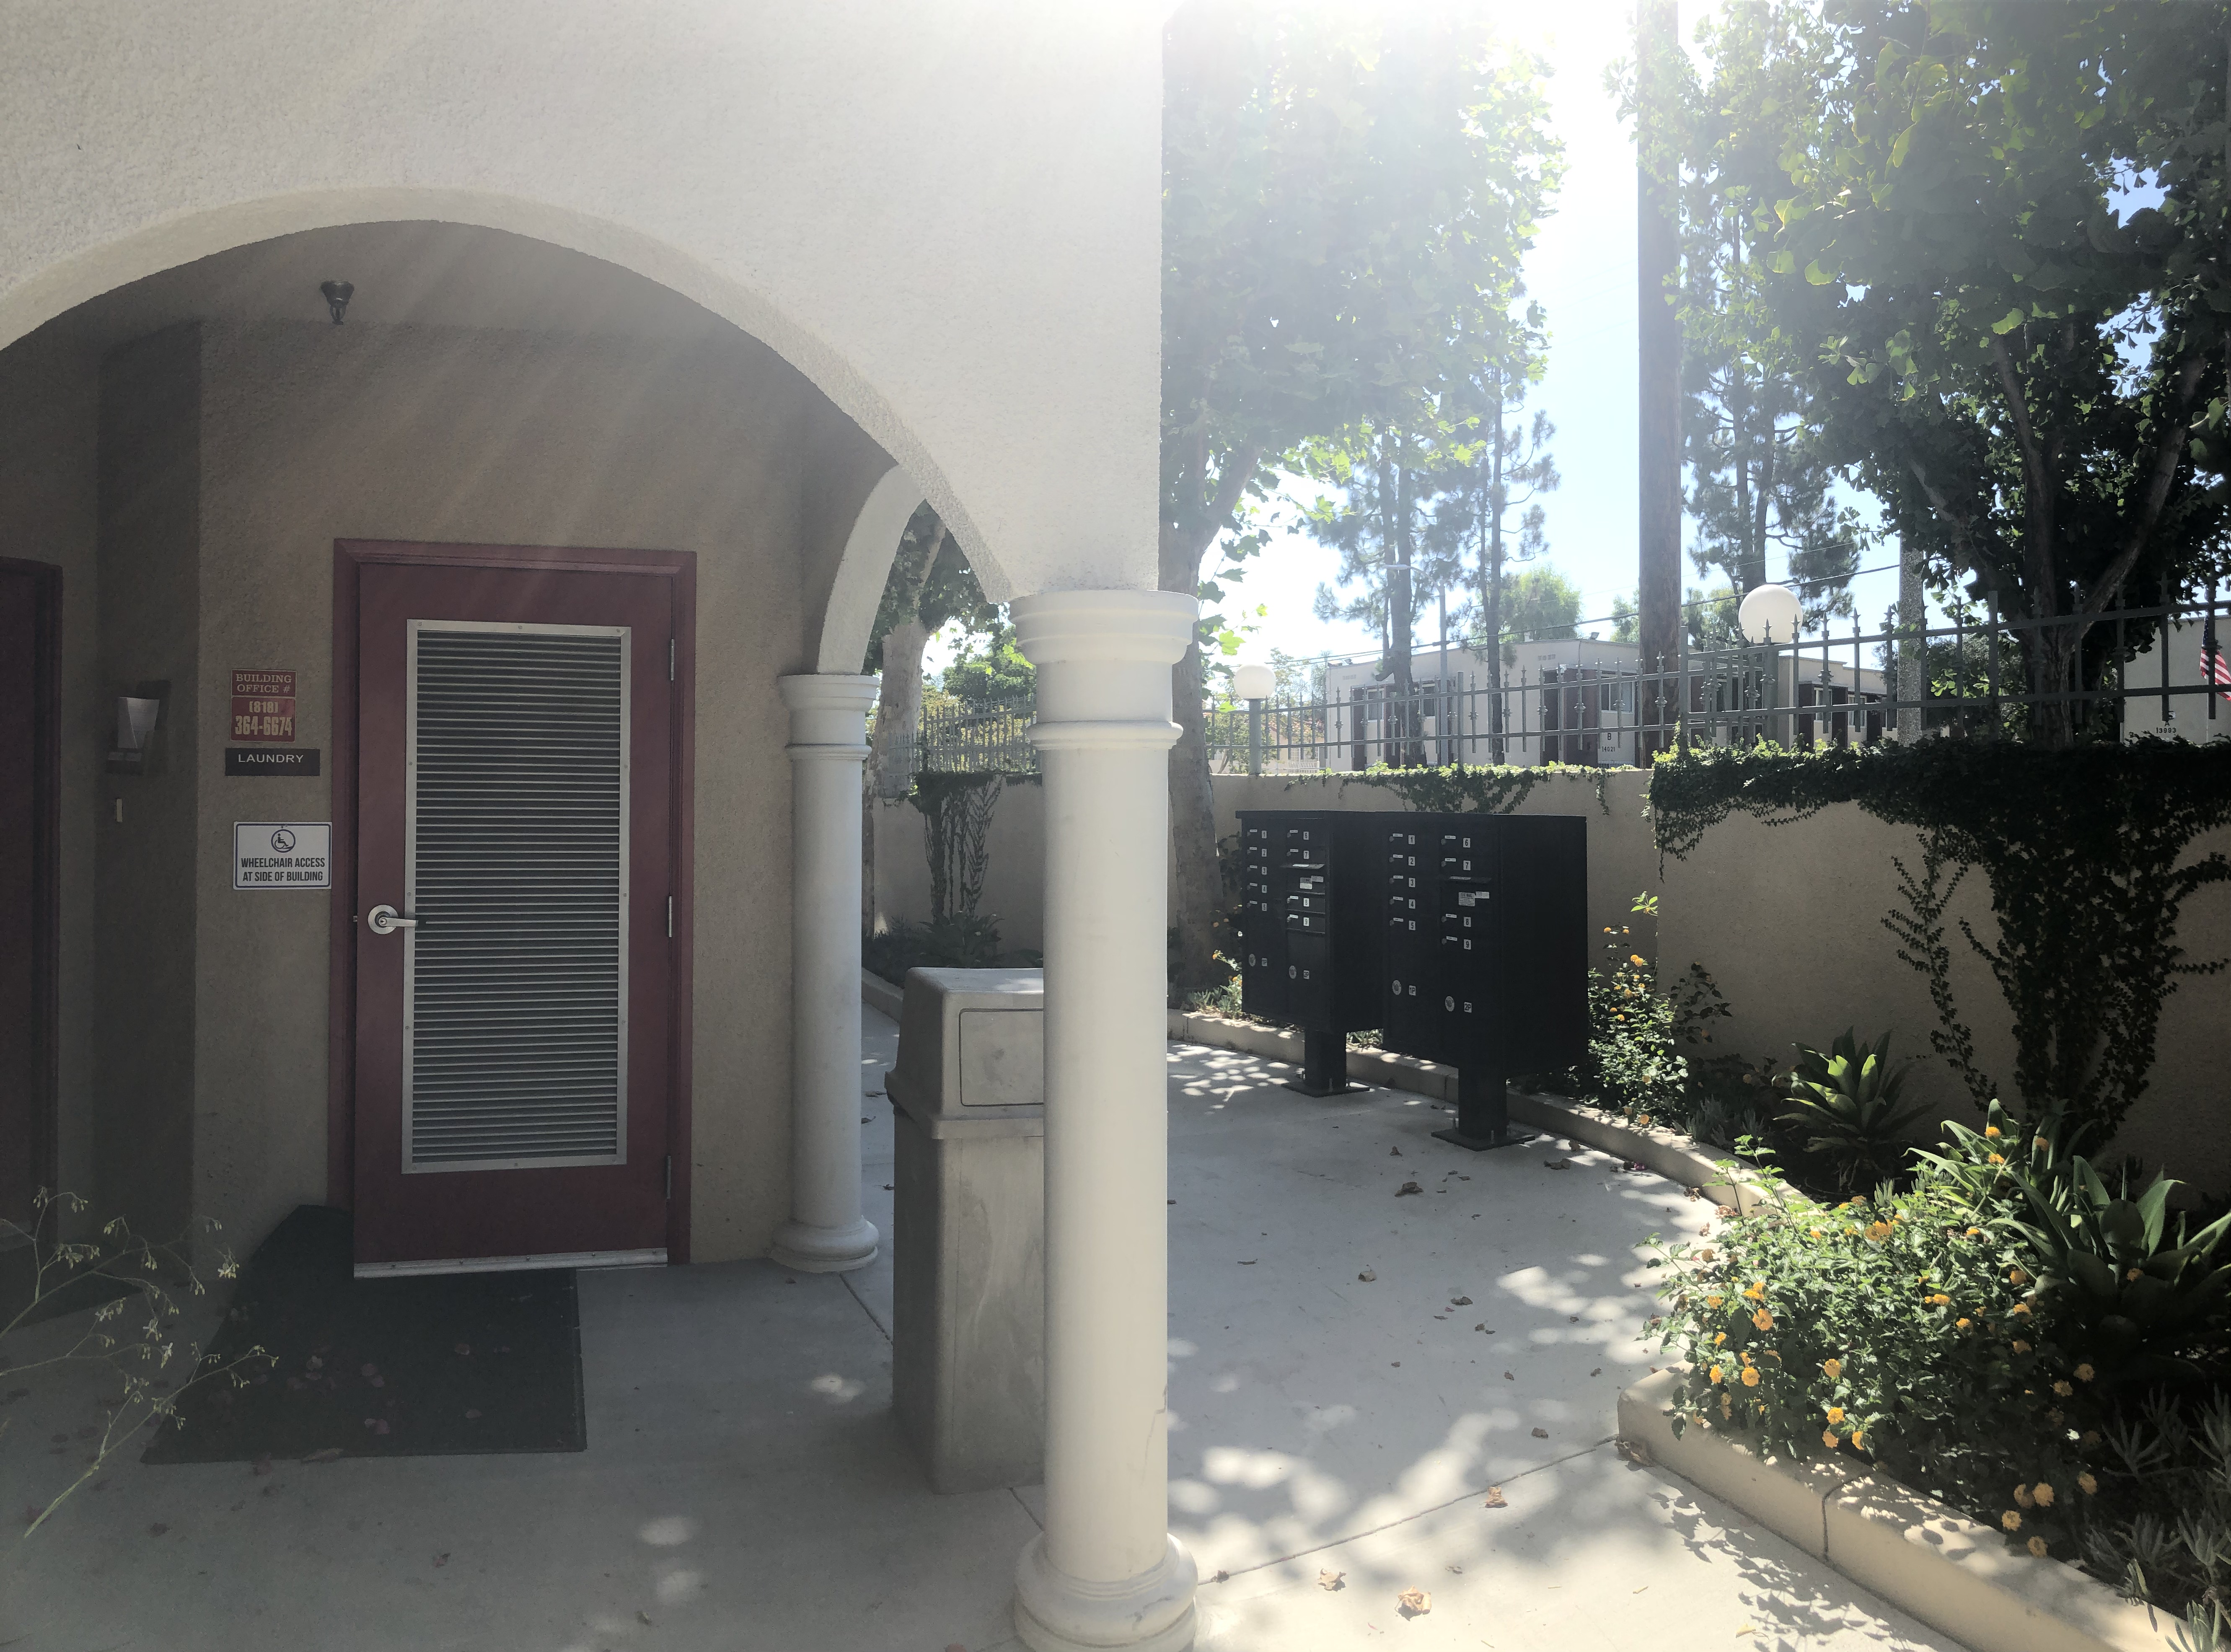 View of the laundry room entrance and the mail box